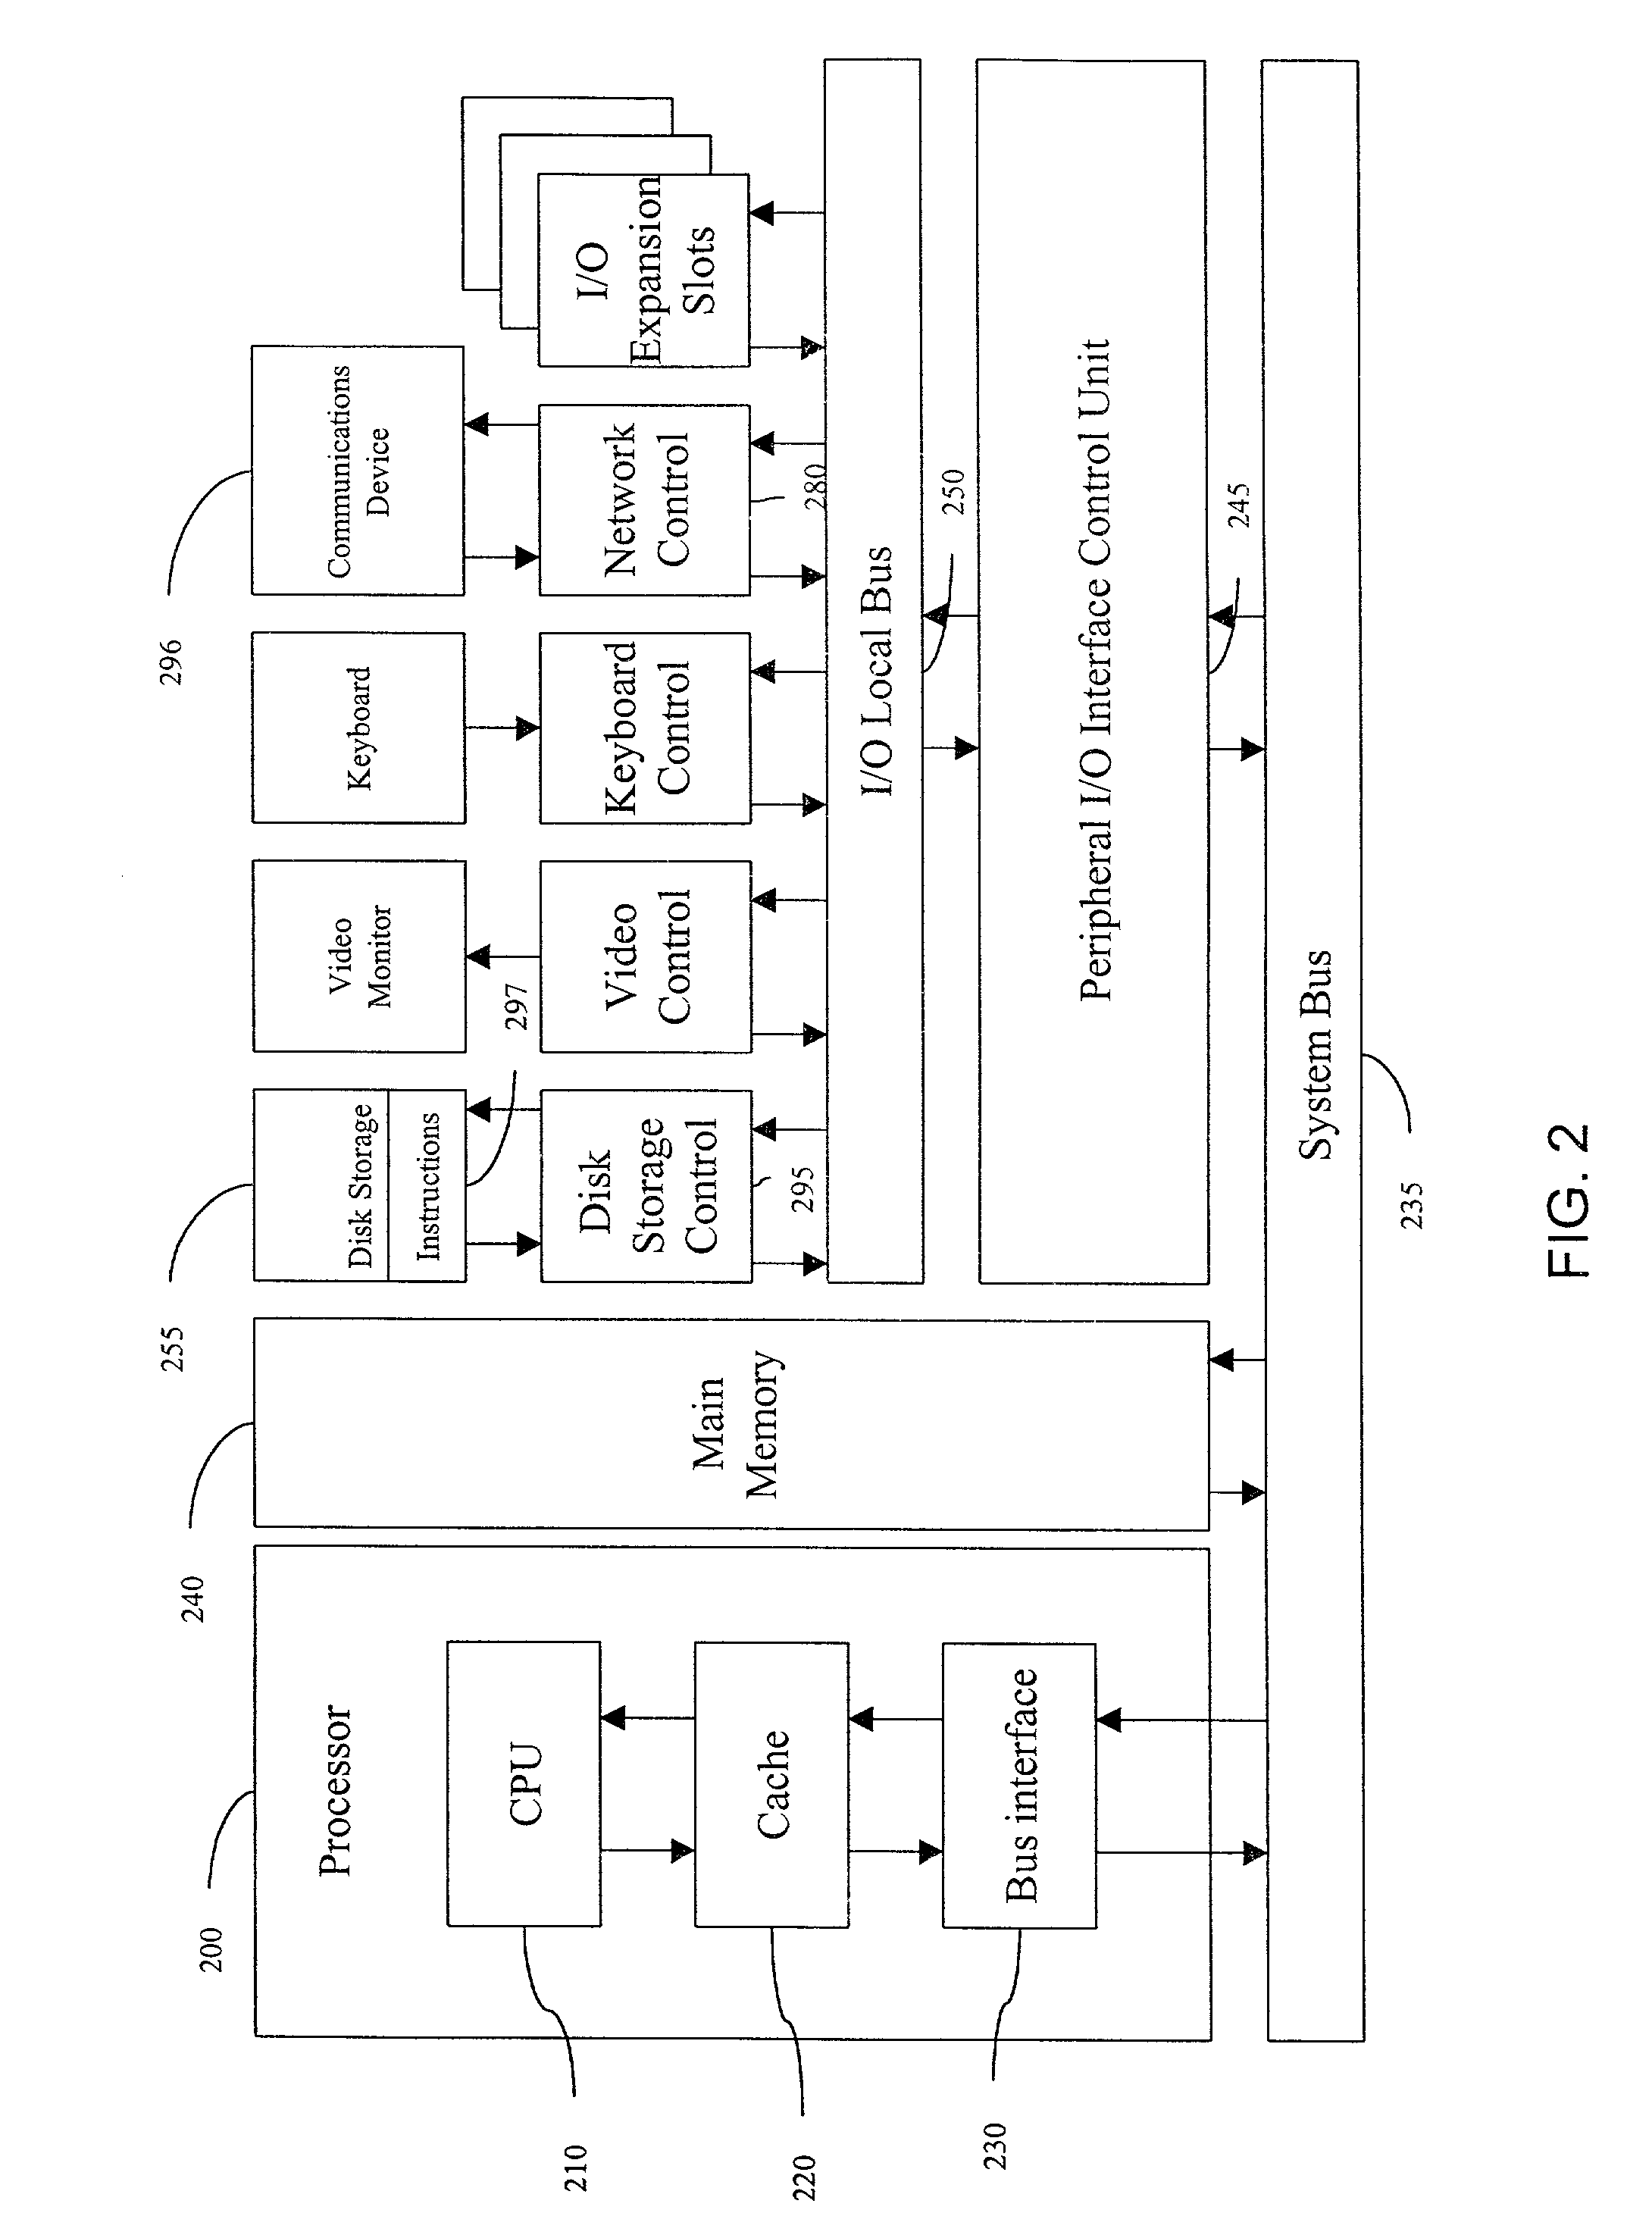 Method and apparatus for a bandwidth broker in a packet network